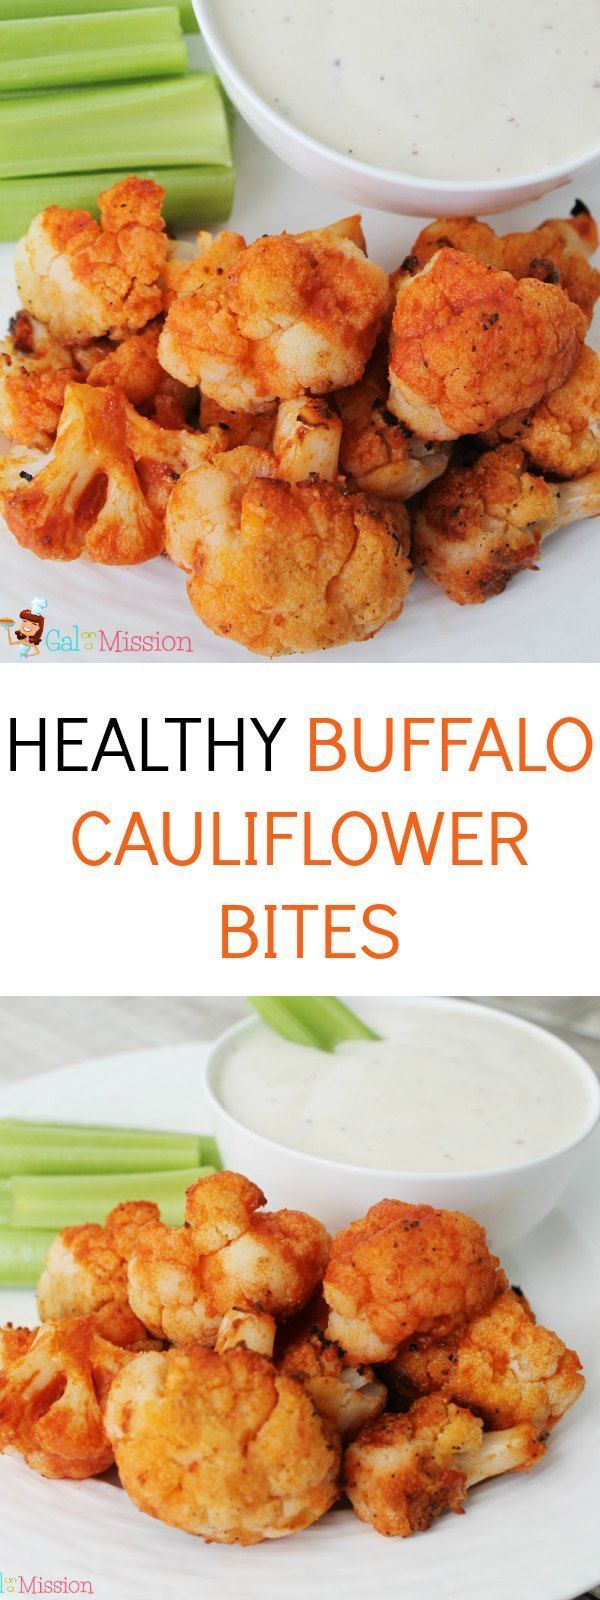 An absolutely delicious and easy healthy buffalo cauliflower bite recipe! Same flavor as buffalo wings or buffalo chicken dip - just healthier! -   23 cauliflower recipes microwave
 ideas